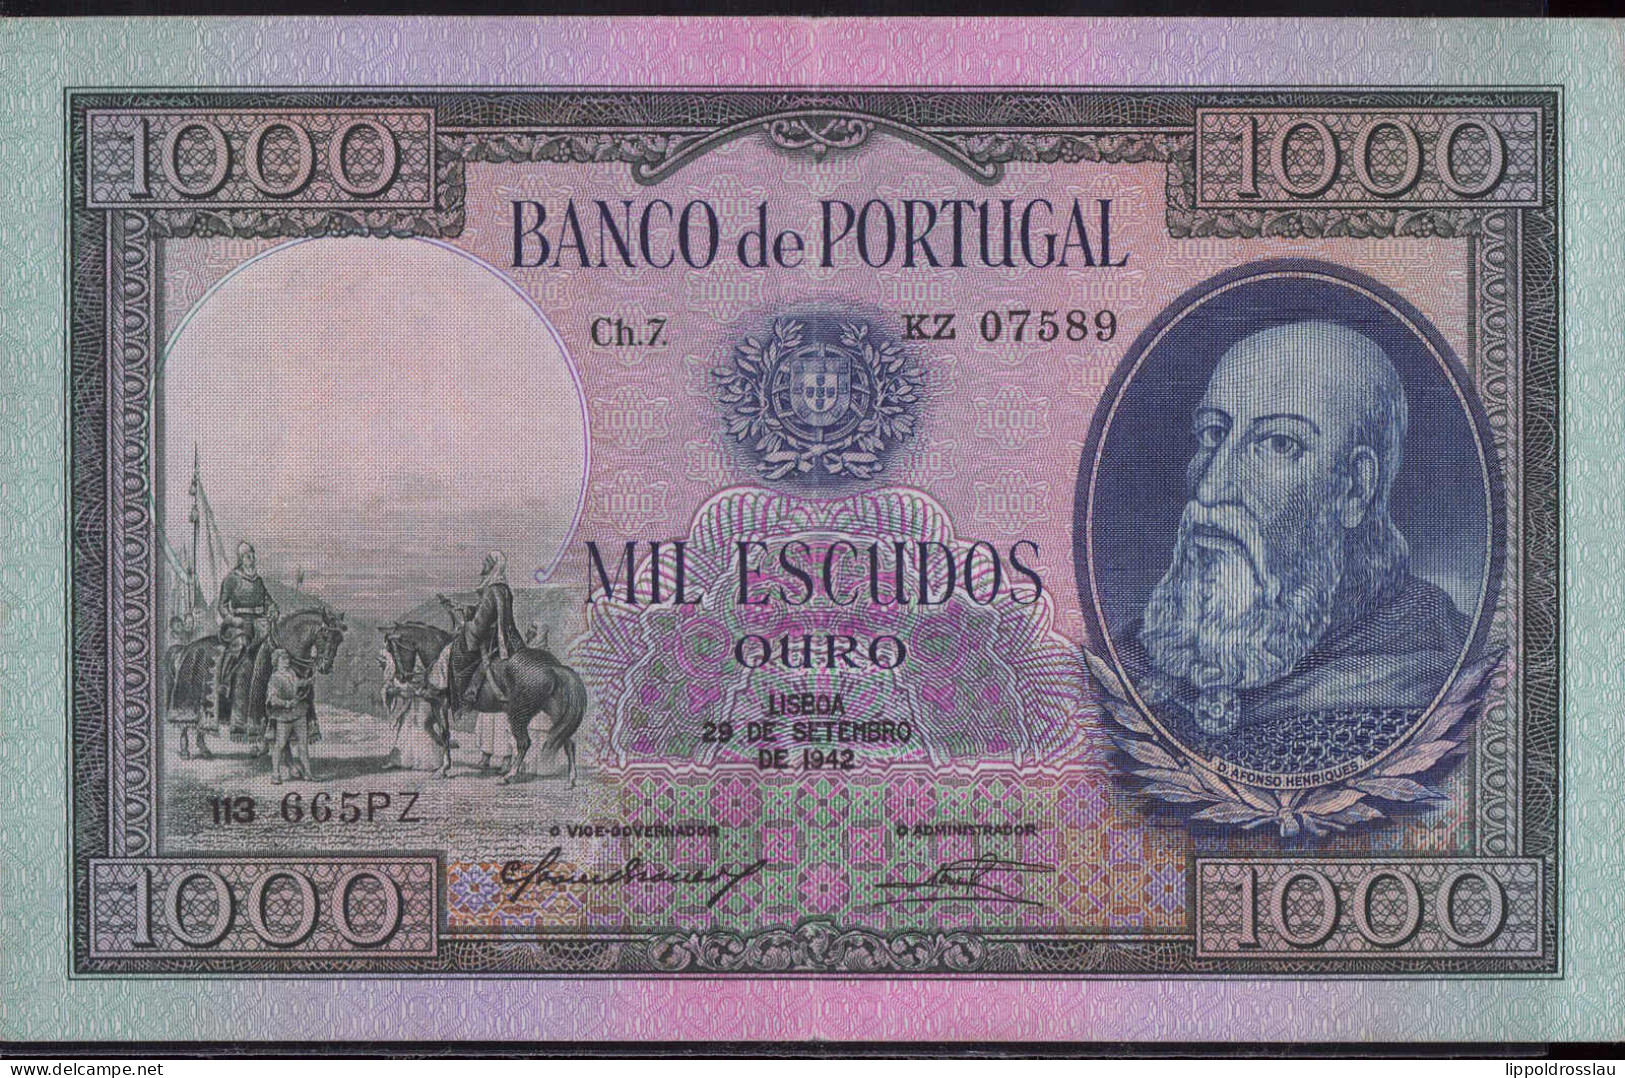 Portugal 1000 Escudos 1942 Pick 156 Erh. I - Other & Unclassified